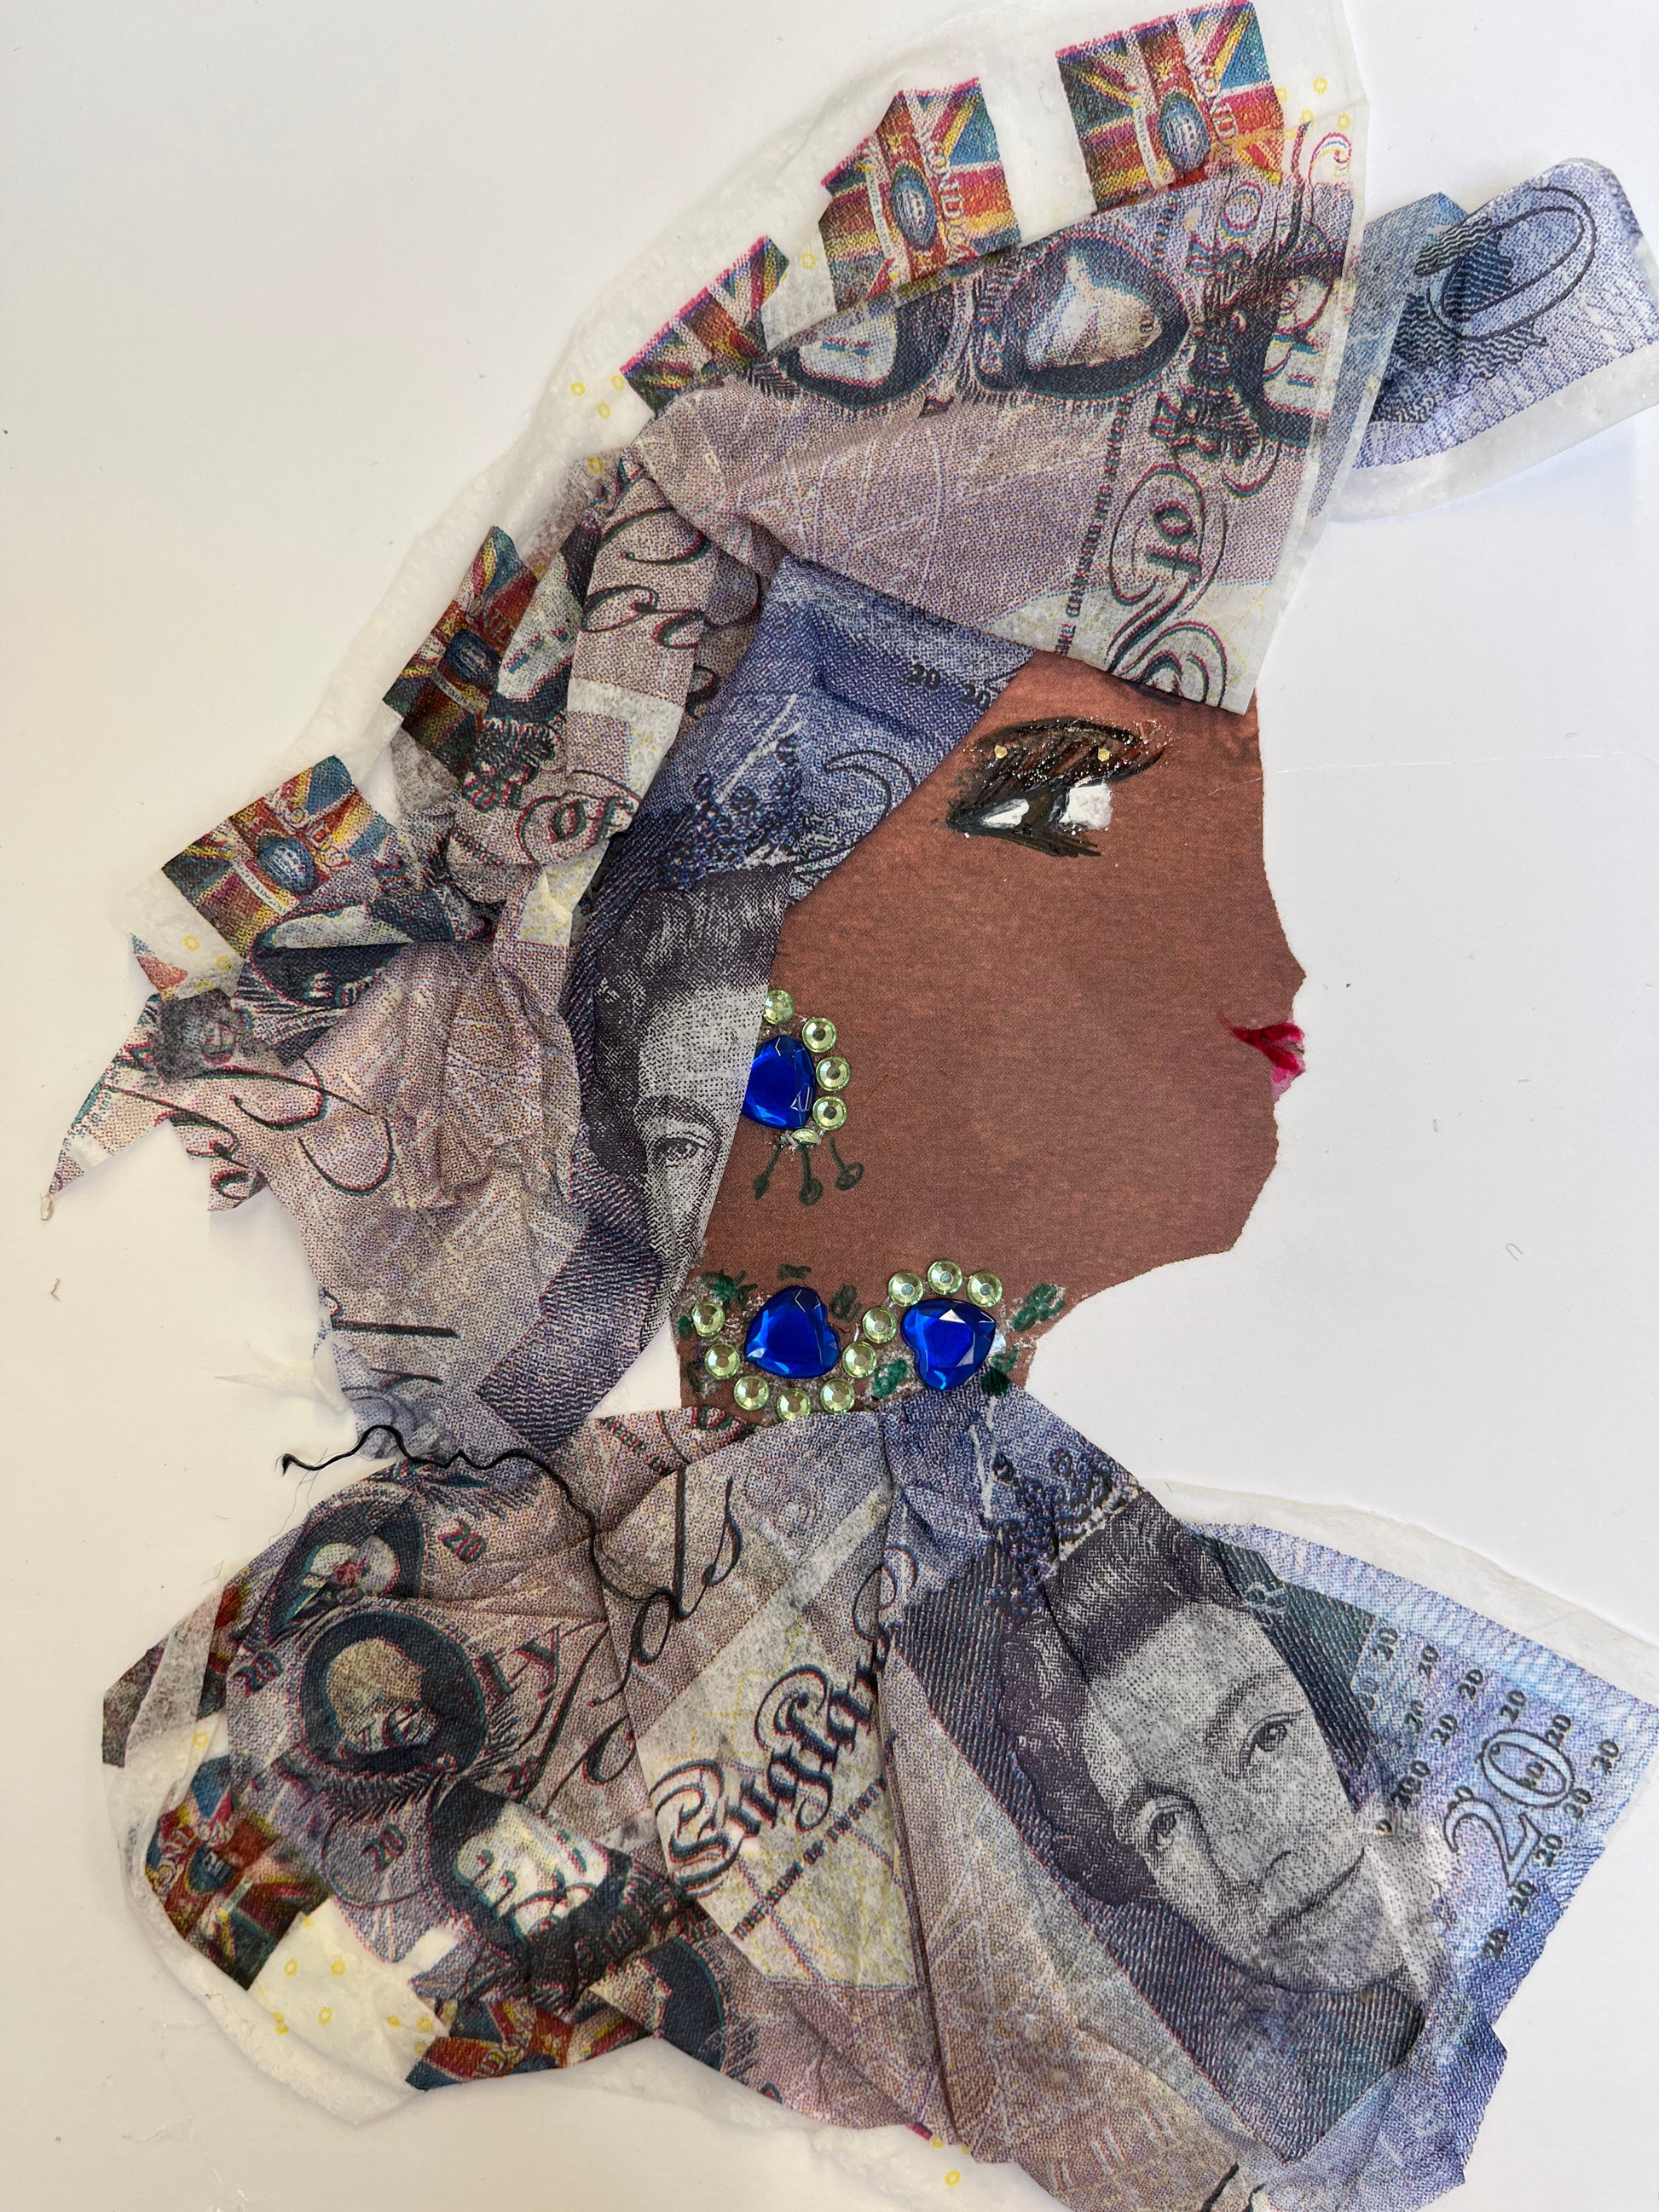 This card has been given the name avery, and she wears a matching headdress and blouse made of a money fabric. She wears blue and green gem jewellery. 